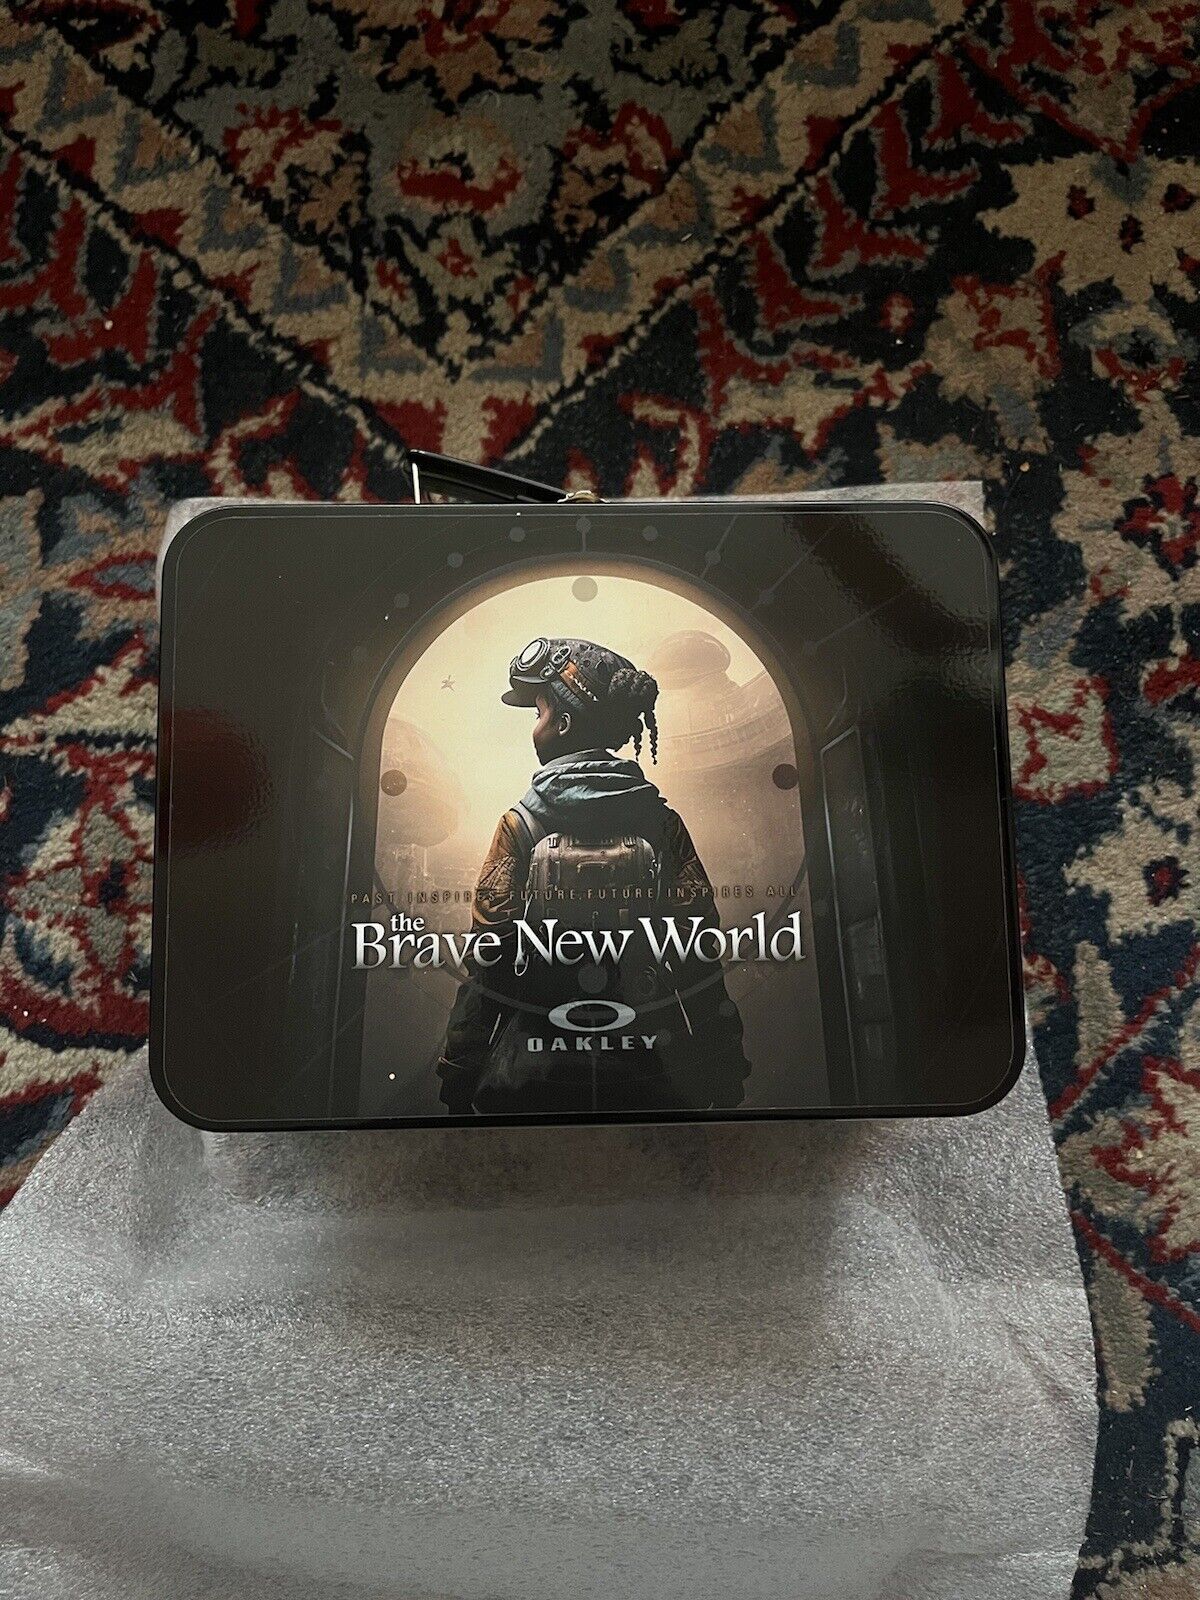 Oakley Extremely Rare Collector’s Edition Brave New World Metal Lunch Box Tin